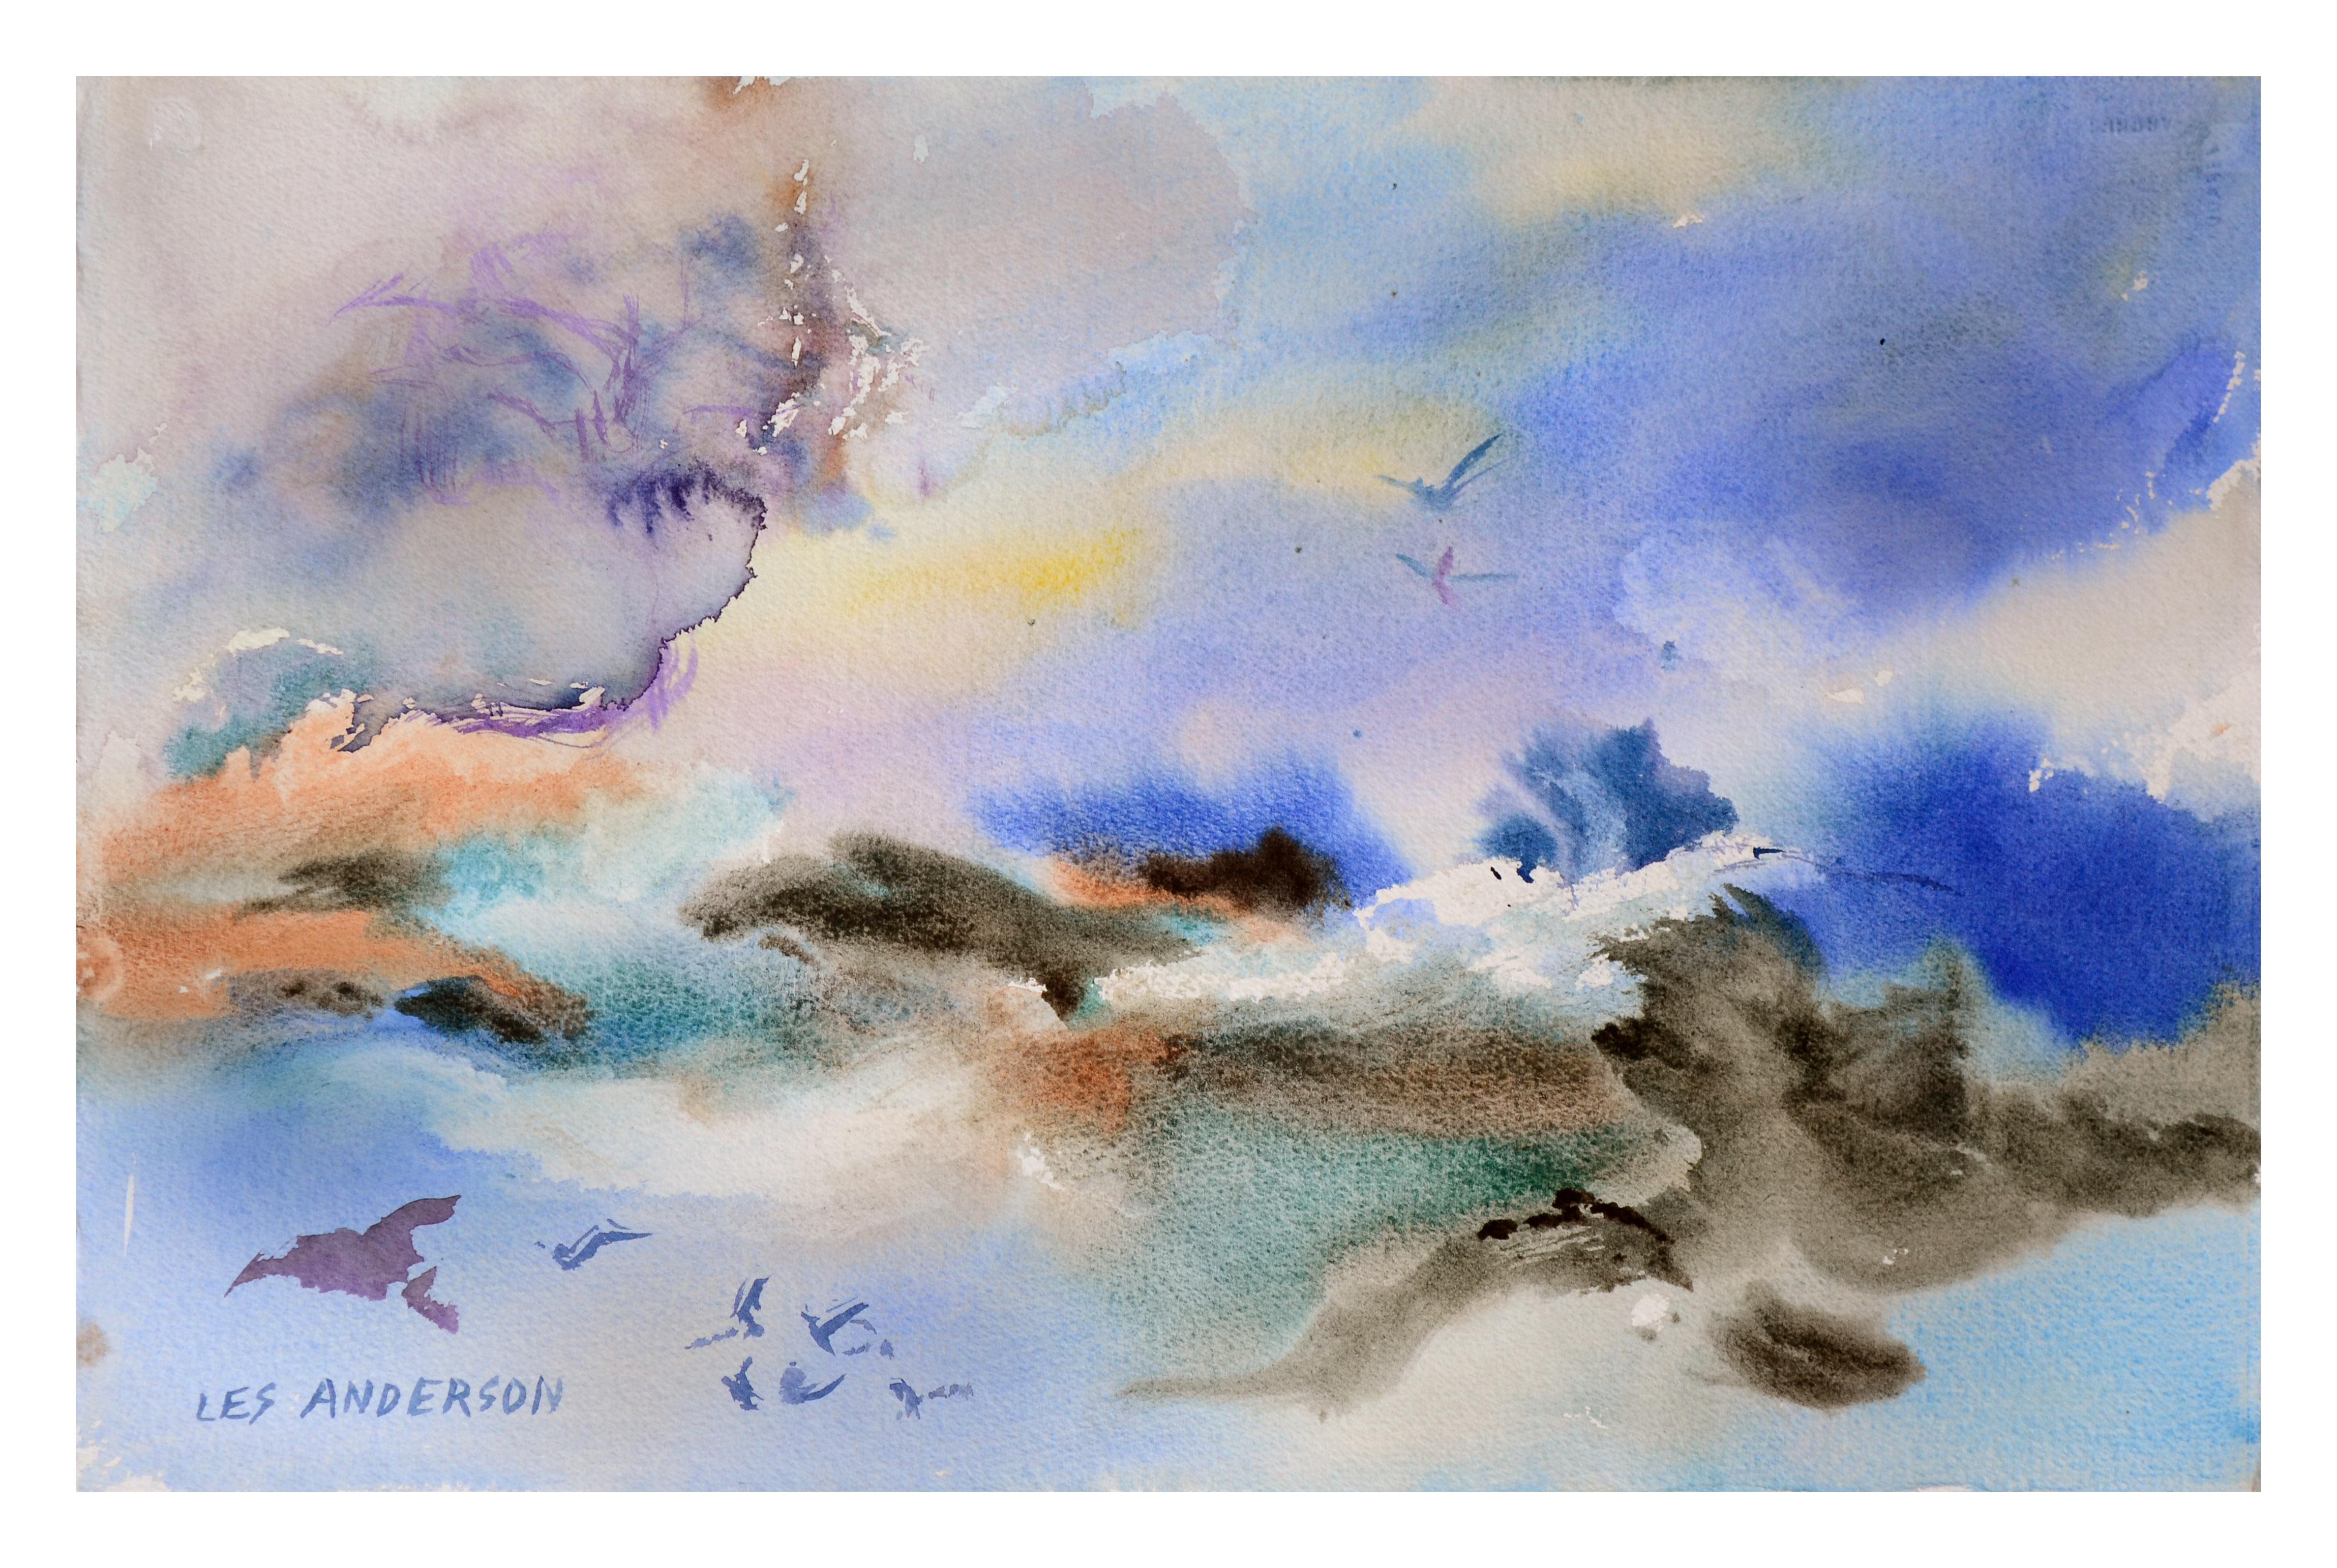 Les Anderson Landscape Art - Sky & Surf - Abstracted Watercolor Landscape with Birds 